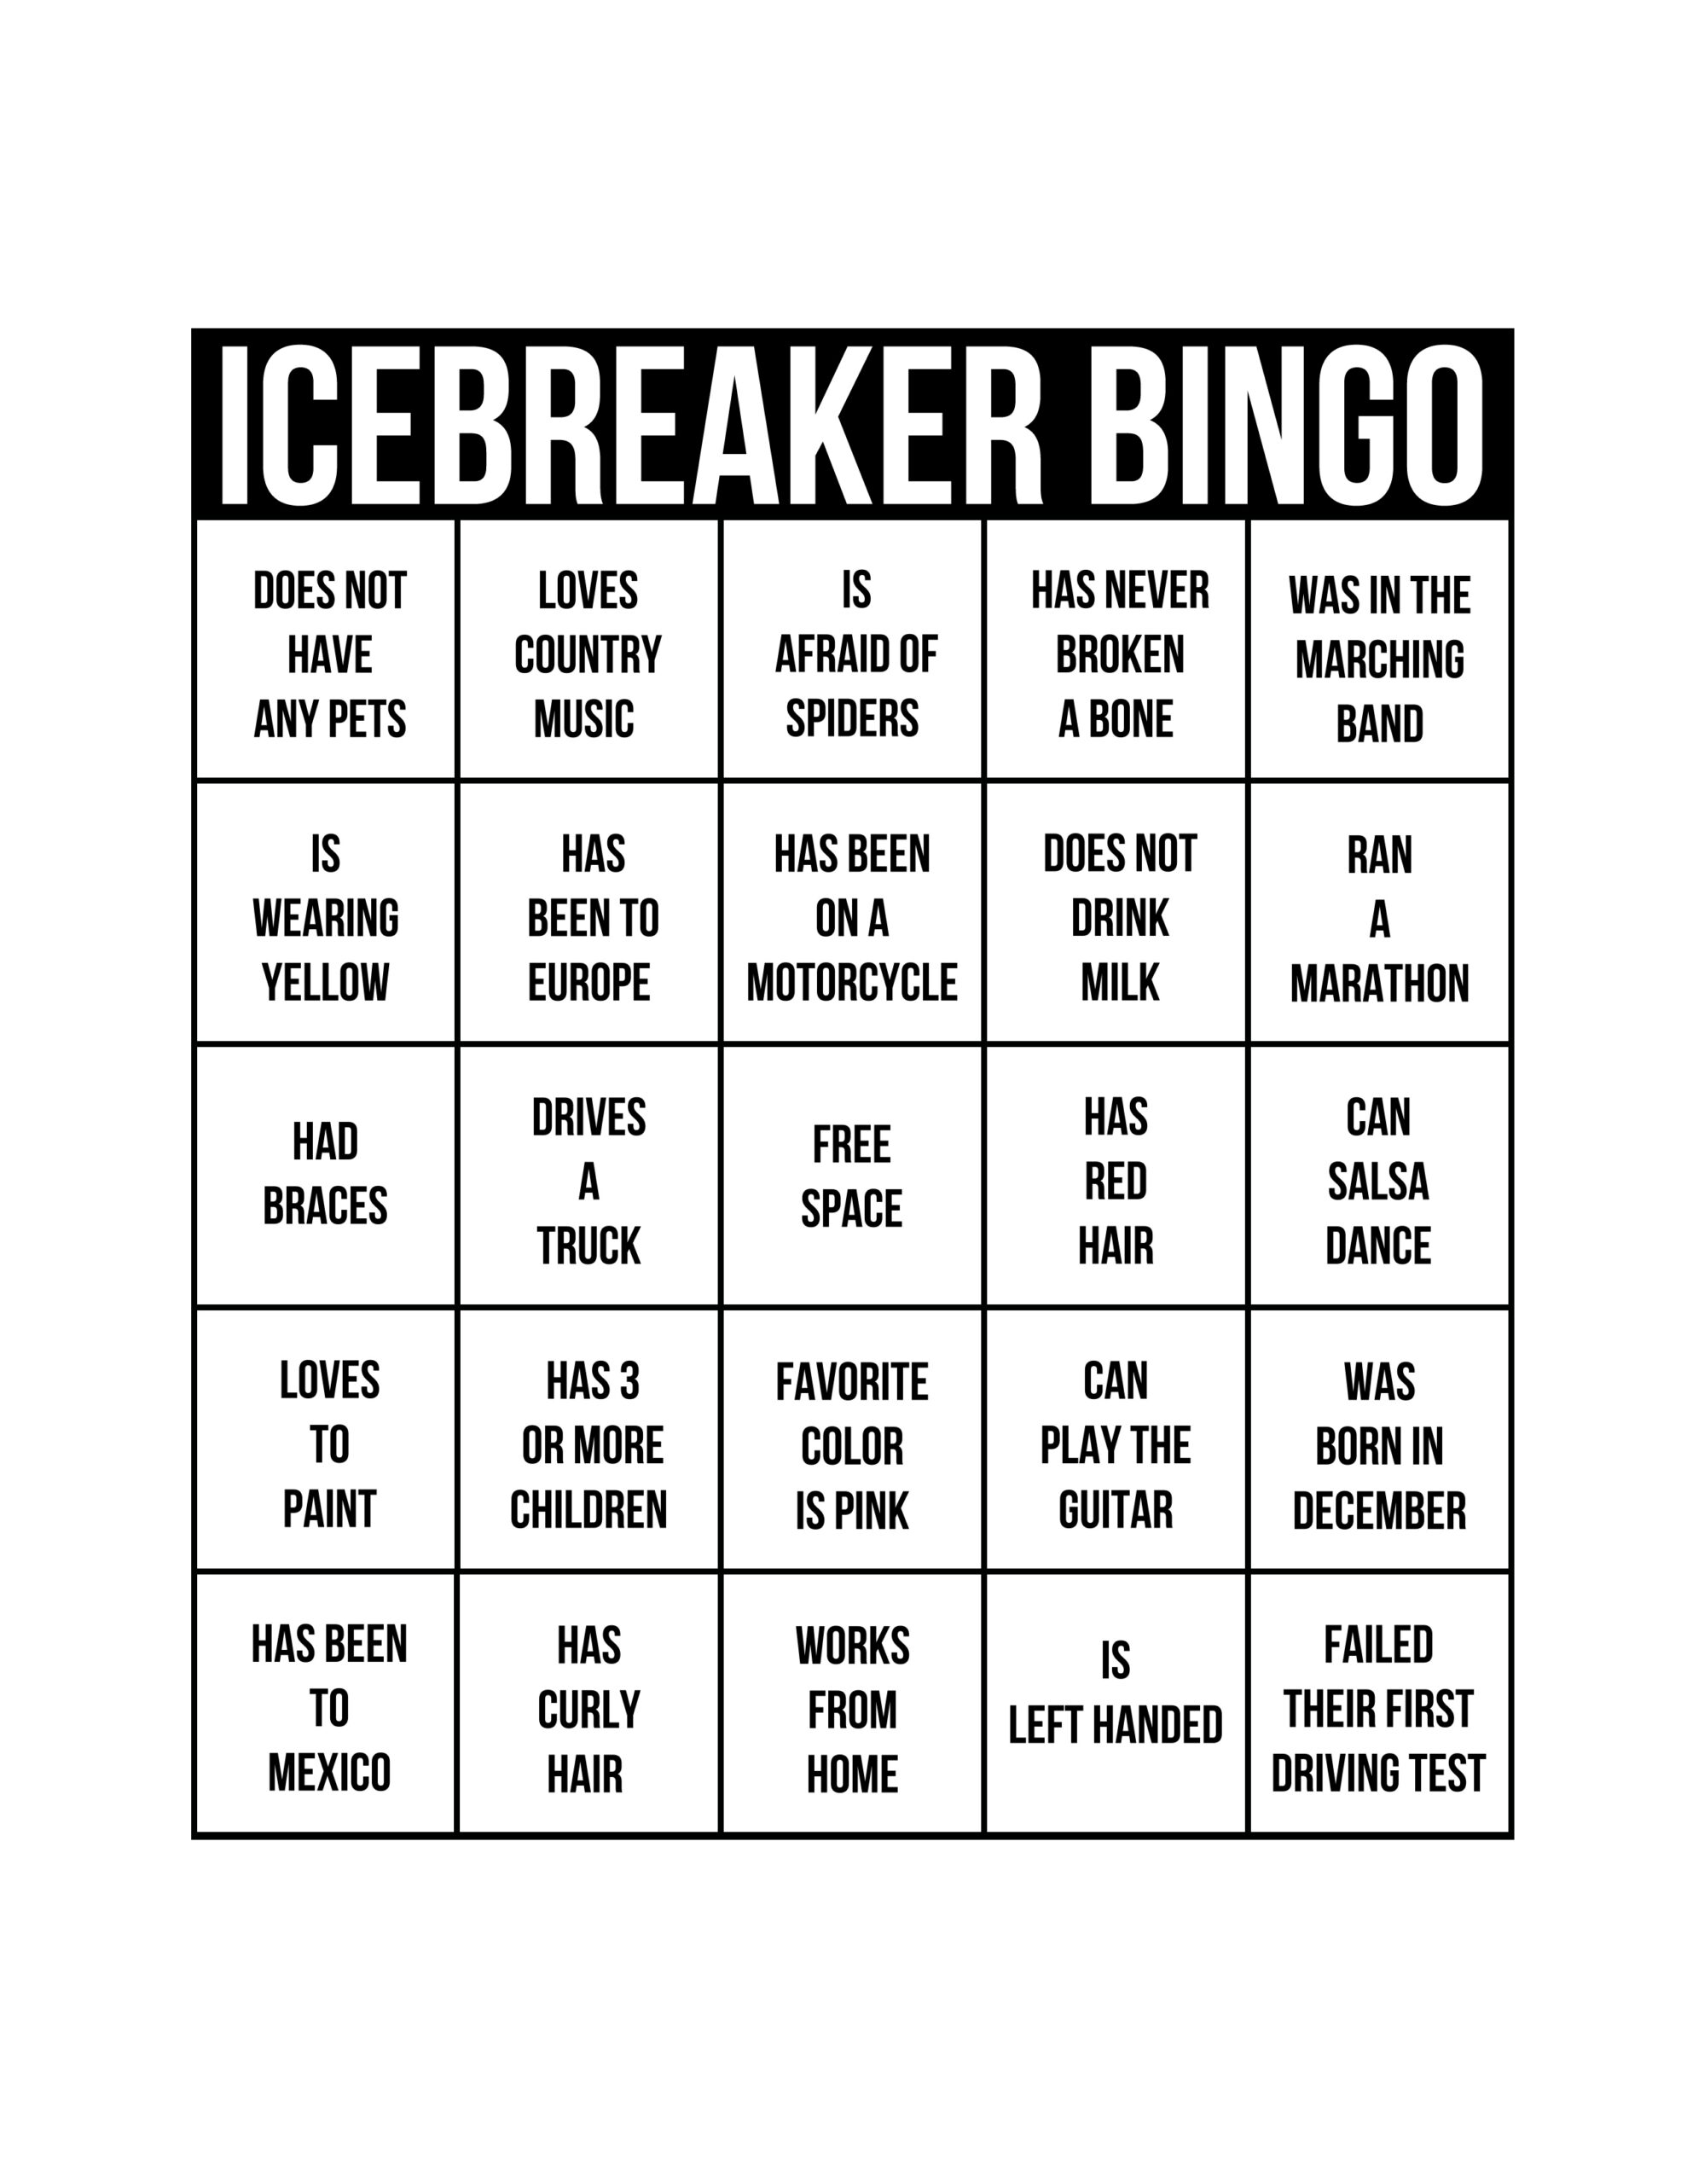 24 Images Of Icebreaker Bingo Game Template For Work Intended For Ice Breaker Bingo Card Template